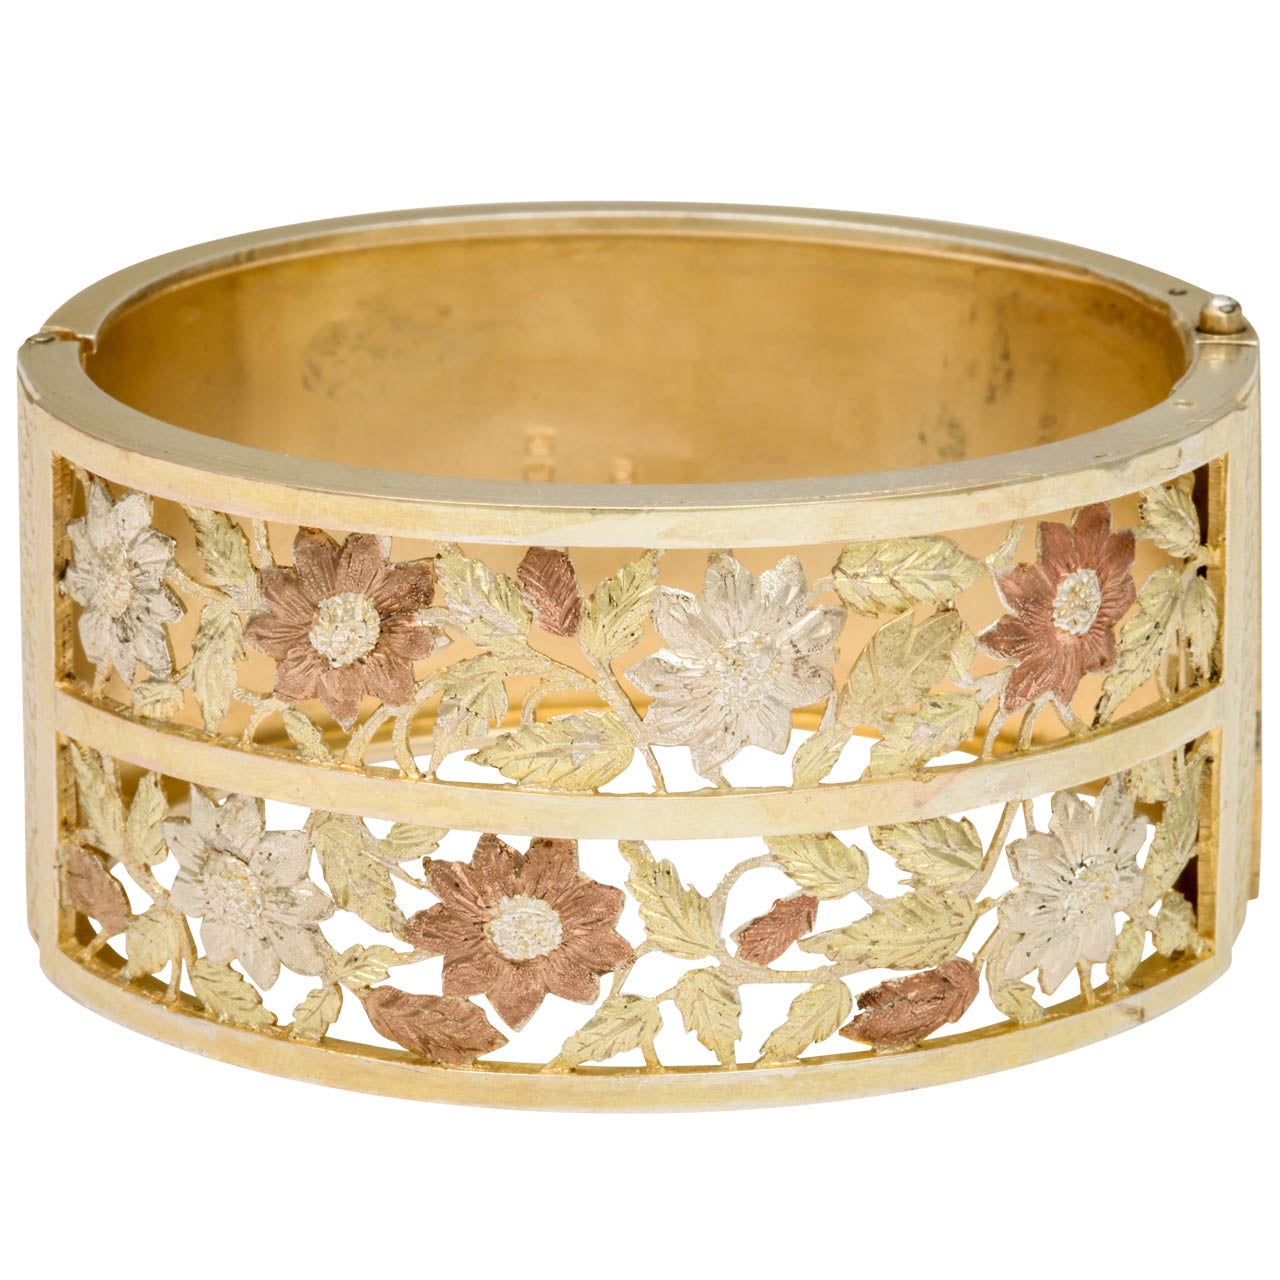 Golden hues fill this bracelet with the intensity of midday sun. Two rows of flowers, with realistic engraving, have been cut from the silver and play among the vines. Crosshatched engraving borders the bracelet sides. The bracelet is English c.